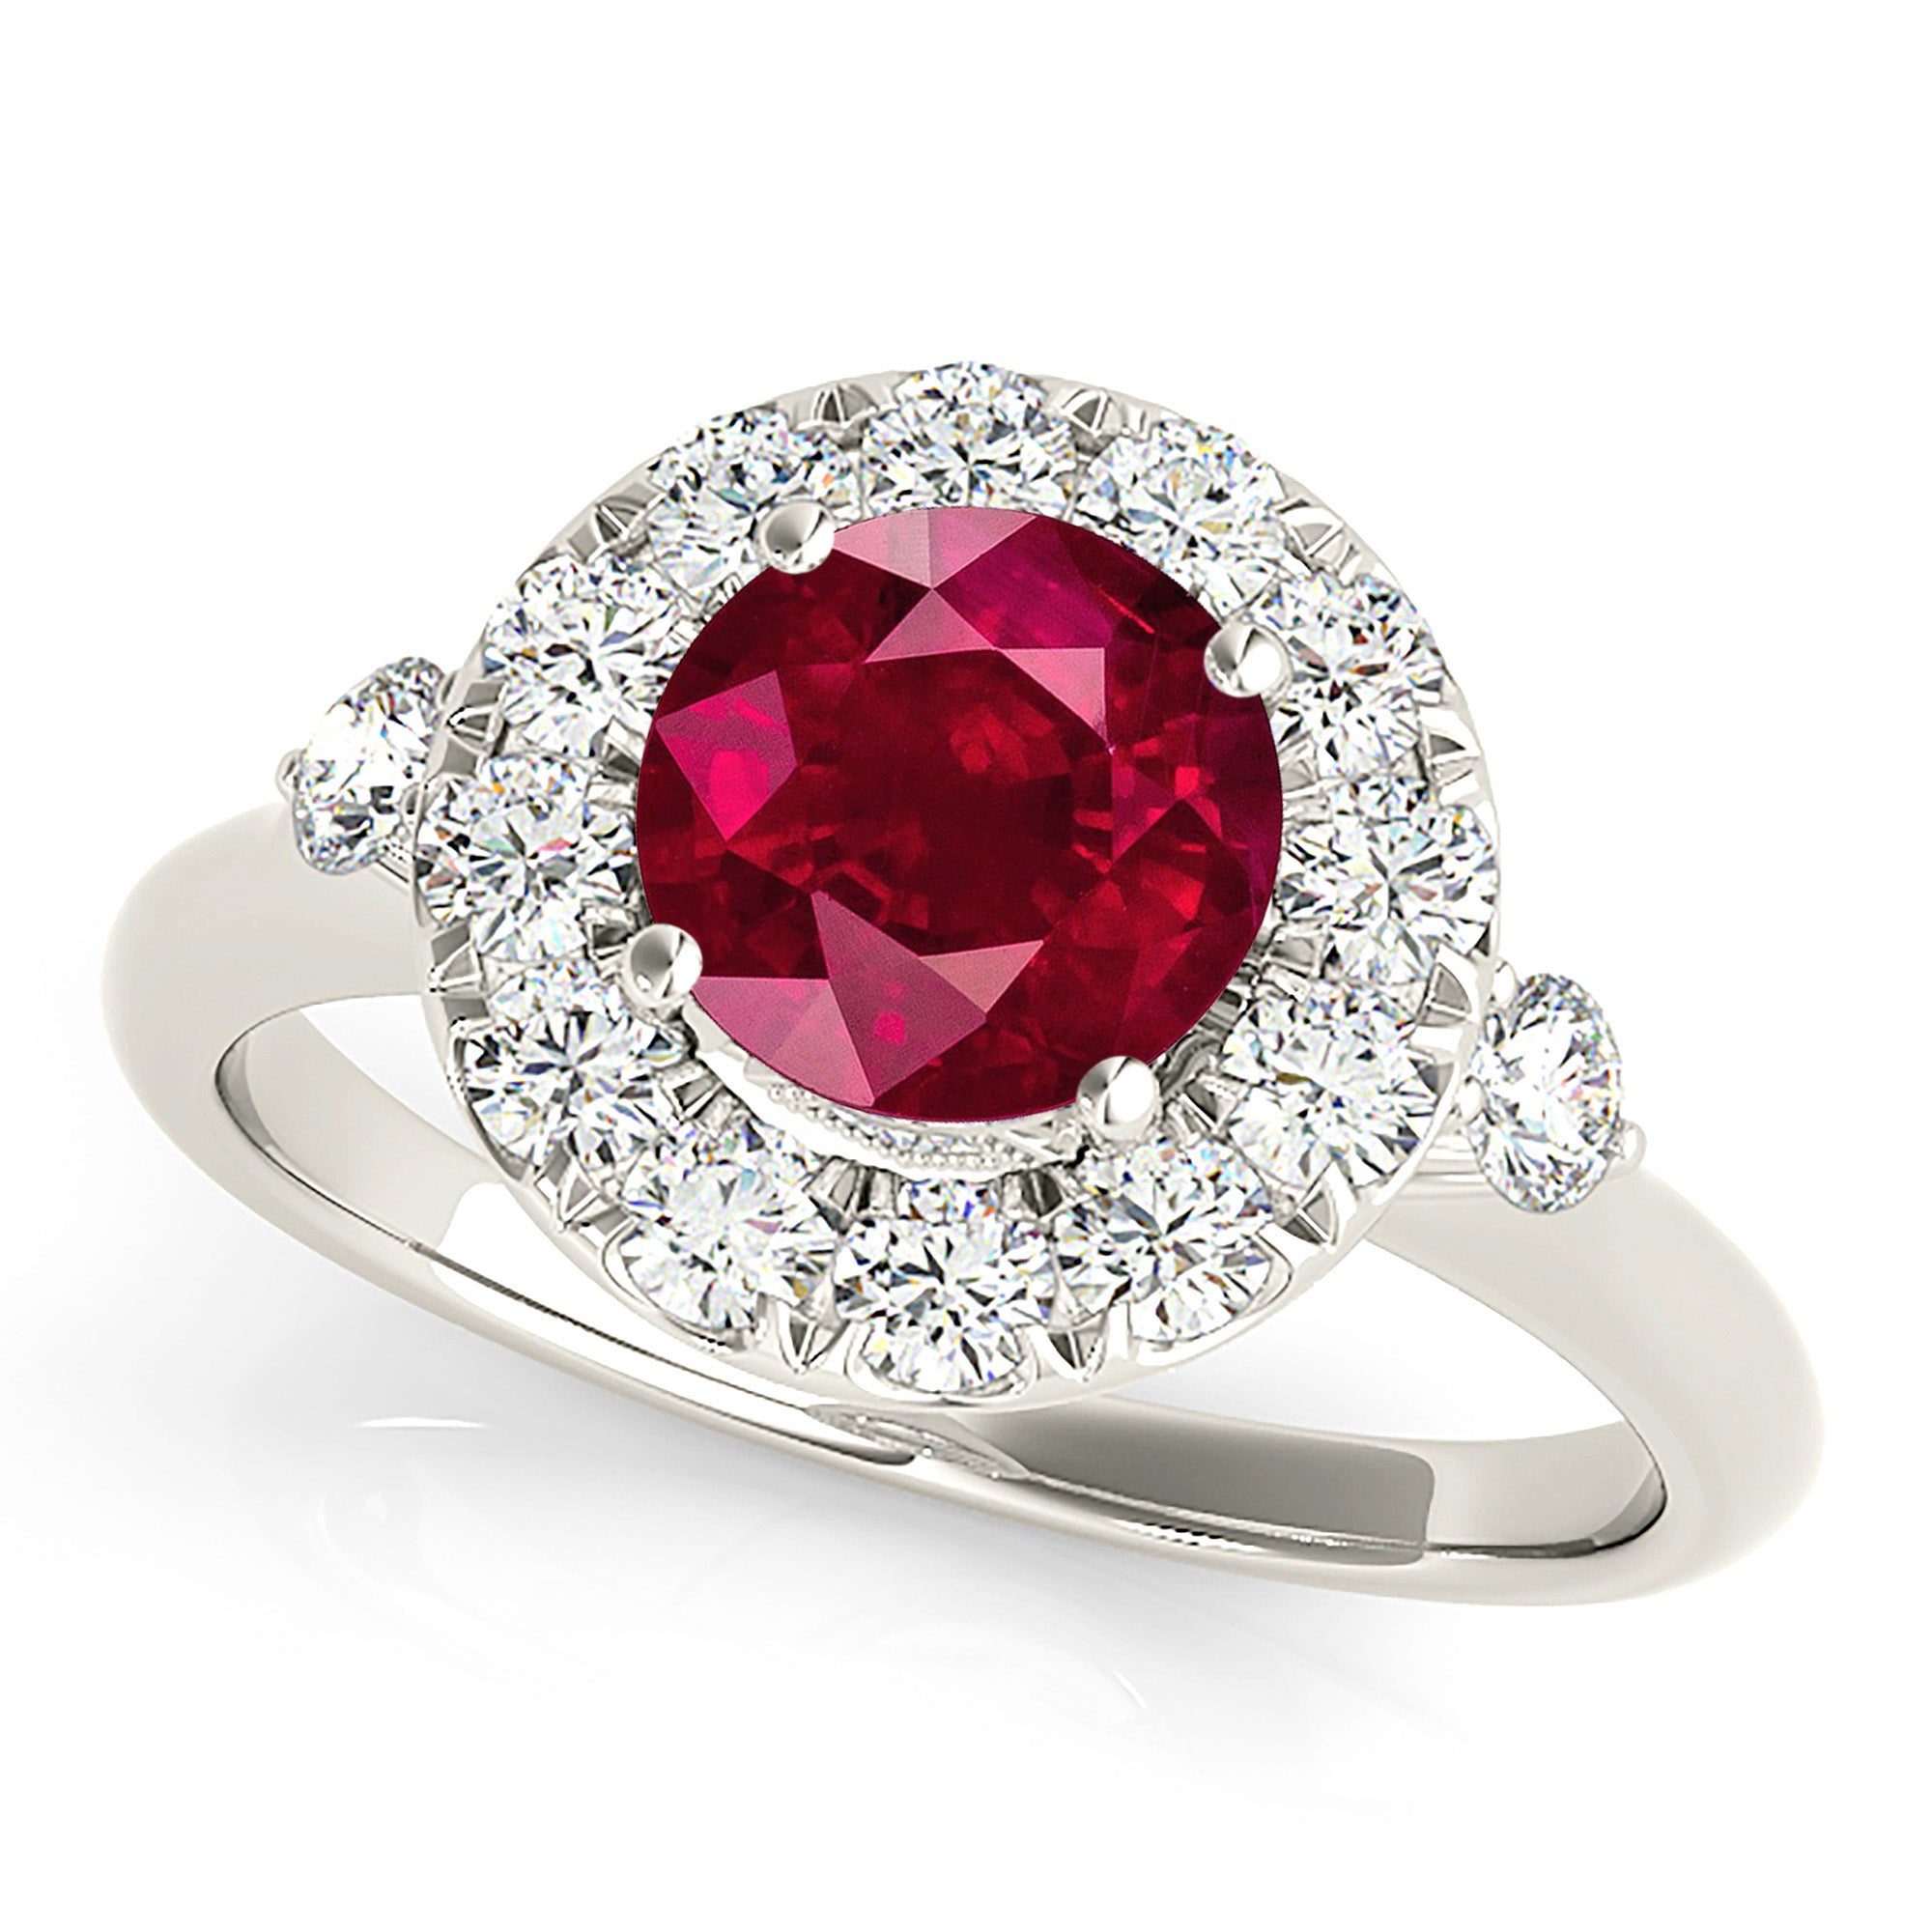 1.35 ct. Genuine Ruby Ring With 0.40 ctw. Diamond Halo And Side Accent Diamonds, Solid Gold band-in 14K/18K White, Yellow, Rose Gold and Platinum - Christmas Jewelry Gift -VIRABYANI